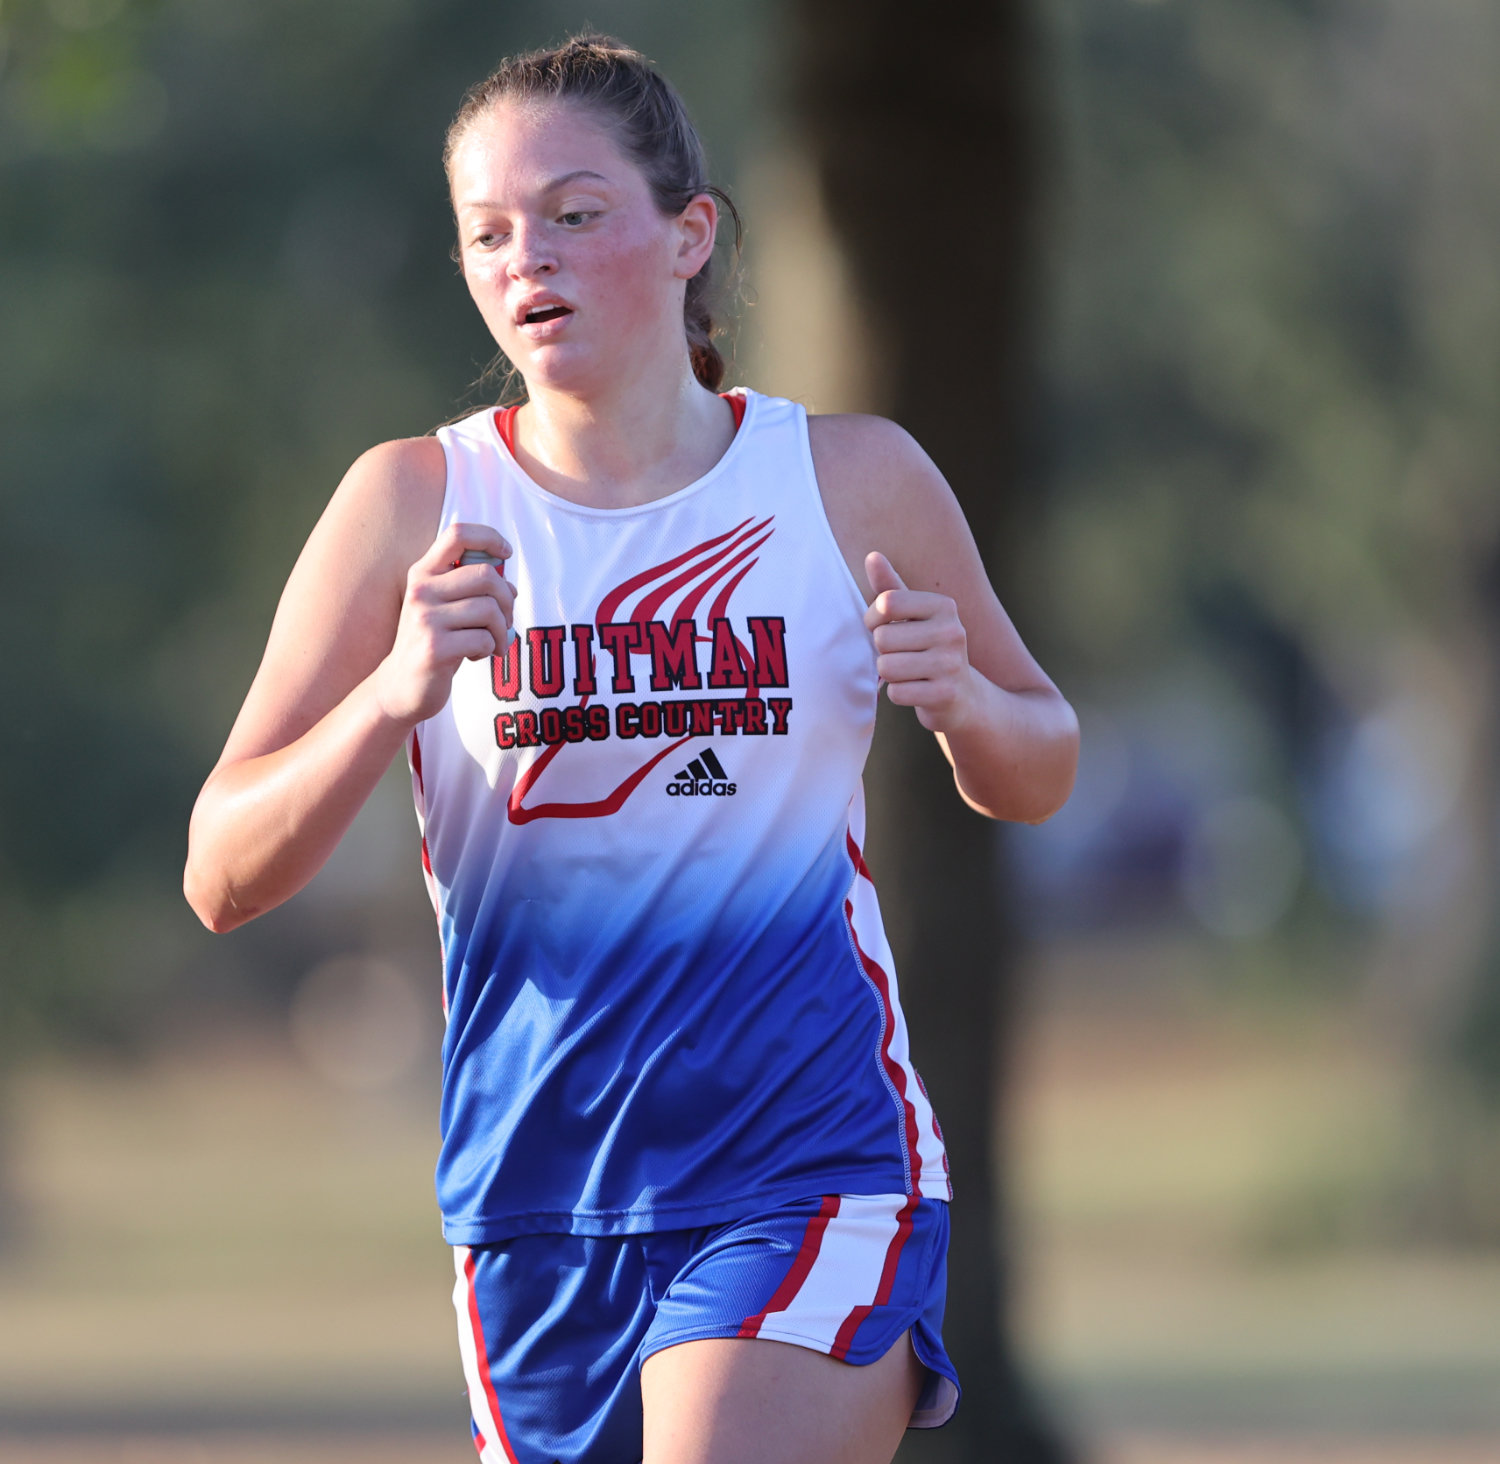 Madyson Pence of Quitman has advanced to the state cross country meet.